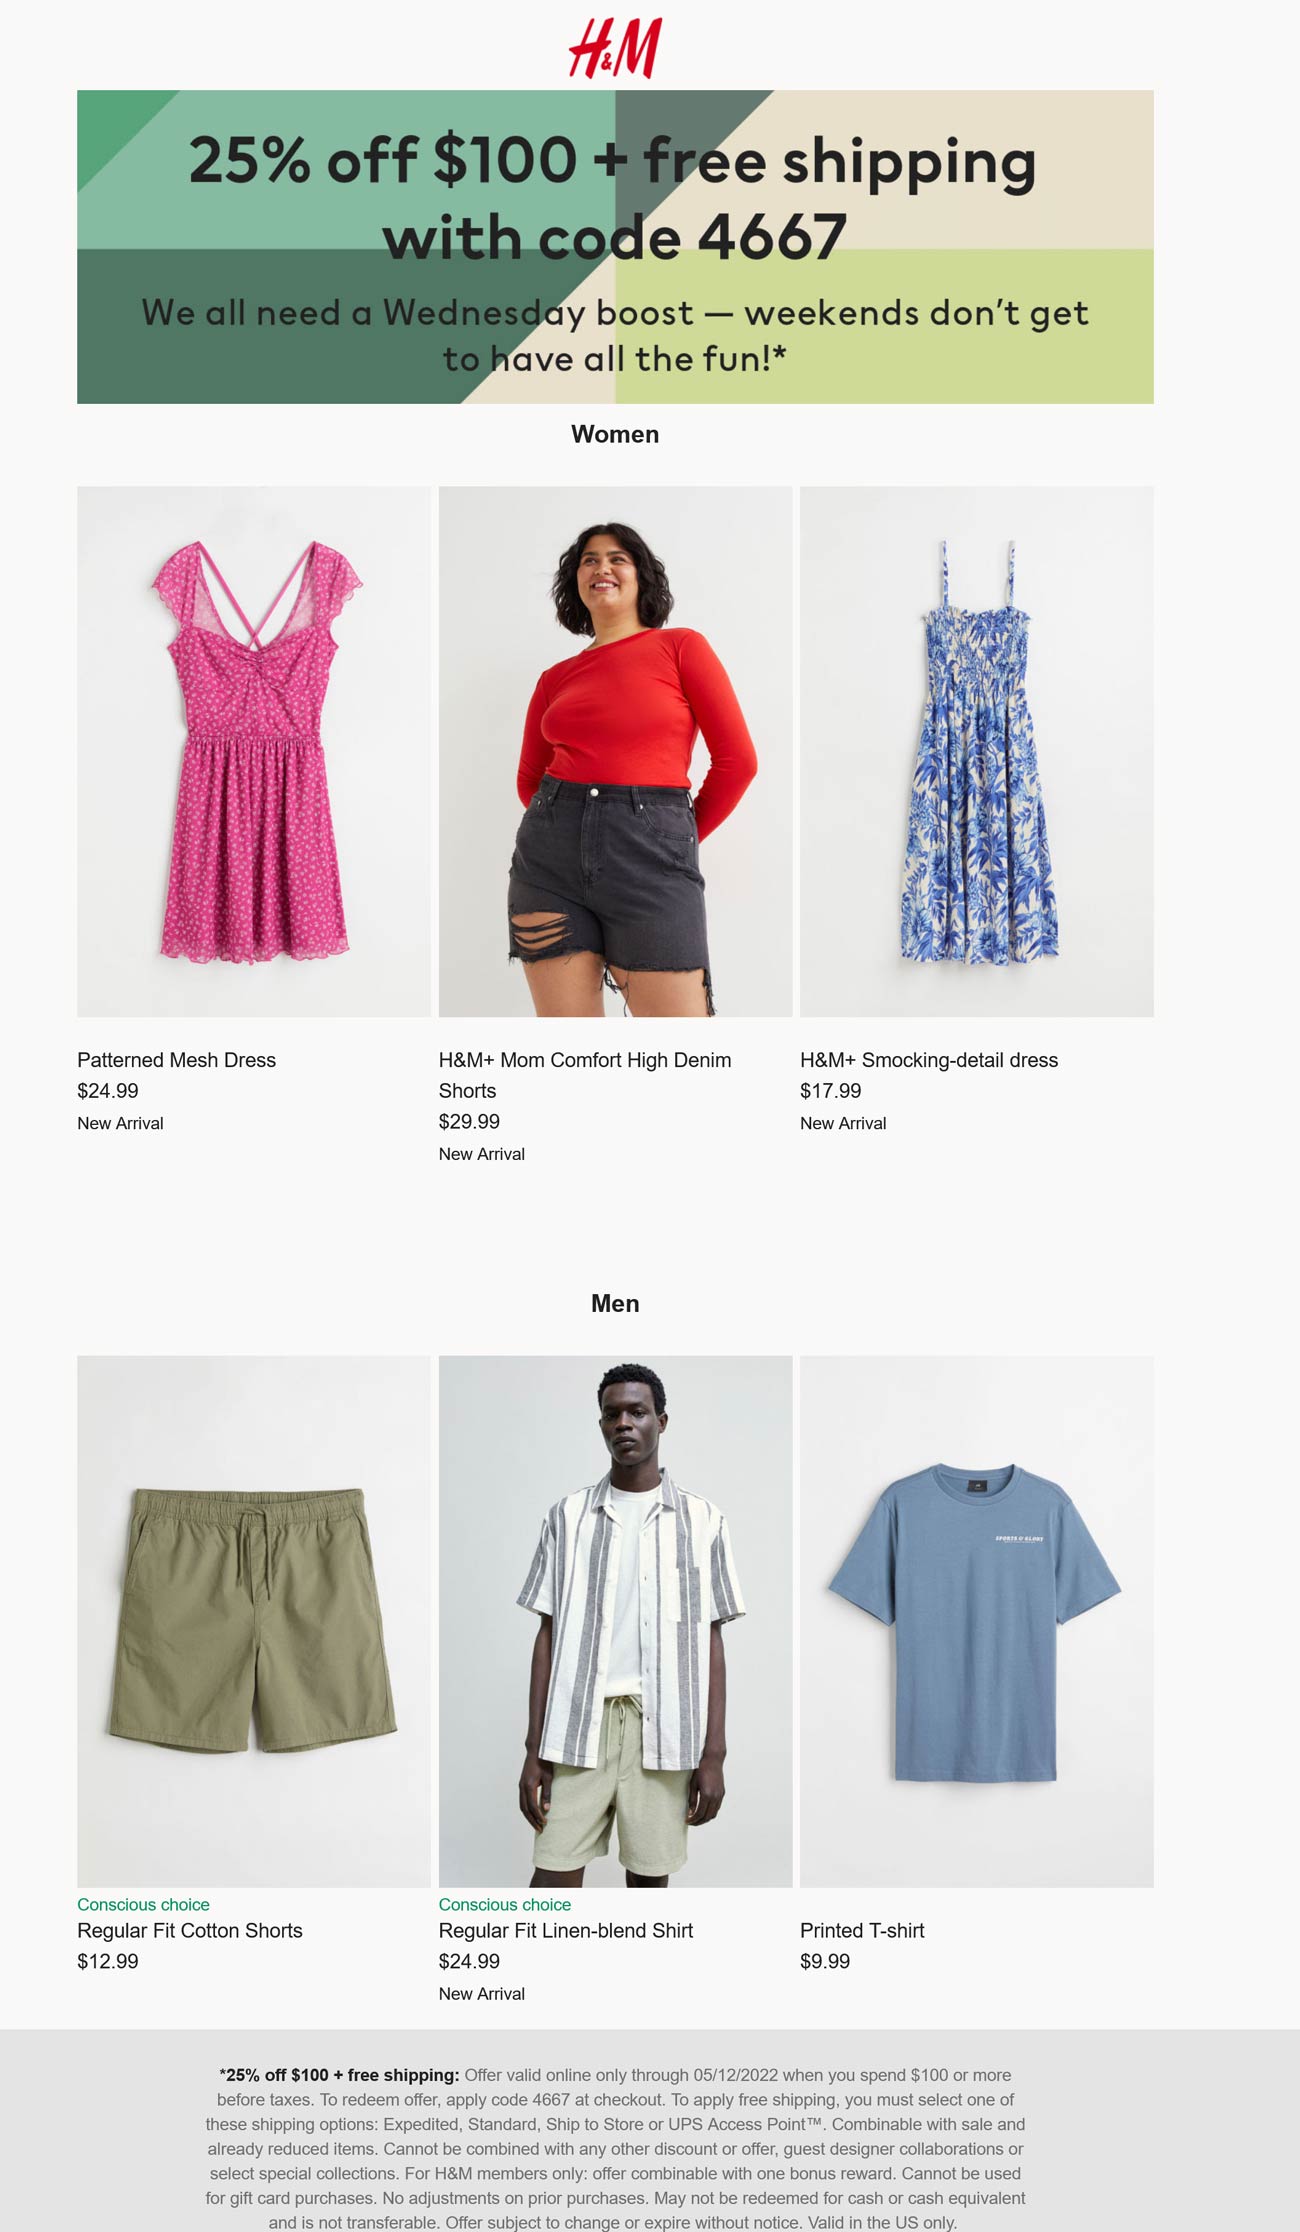 H&M stores Coupon  25% off $100 at H&M via promo code 4667 #hm 